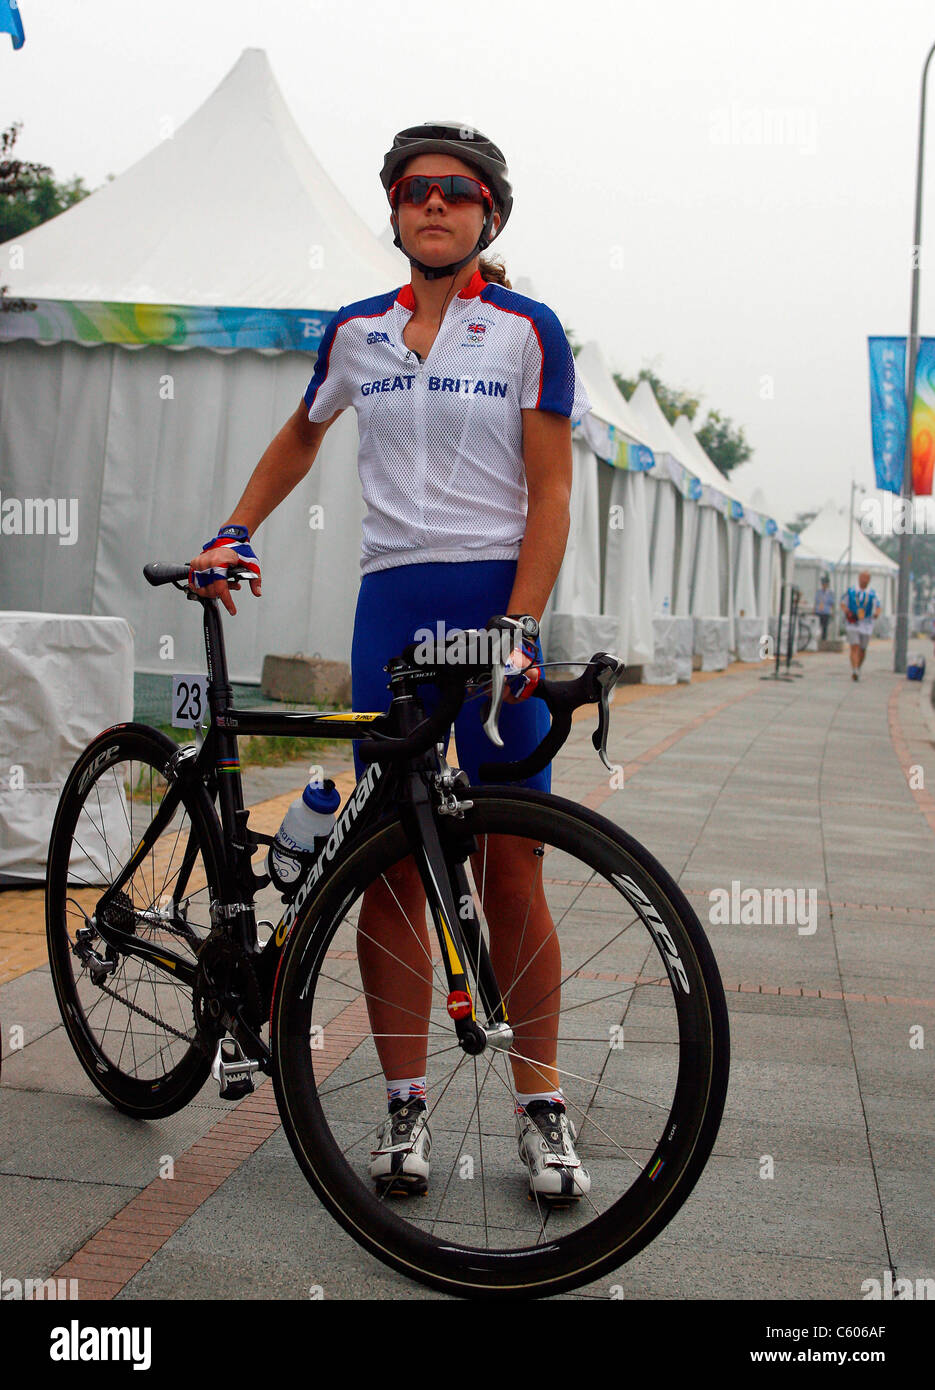 SHARON LAWS WOMENS CYCLING ROAD RACE OLYMPIC STADIUM BEIJING CHINA 10 August 2008 Stock Photo